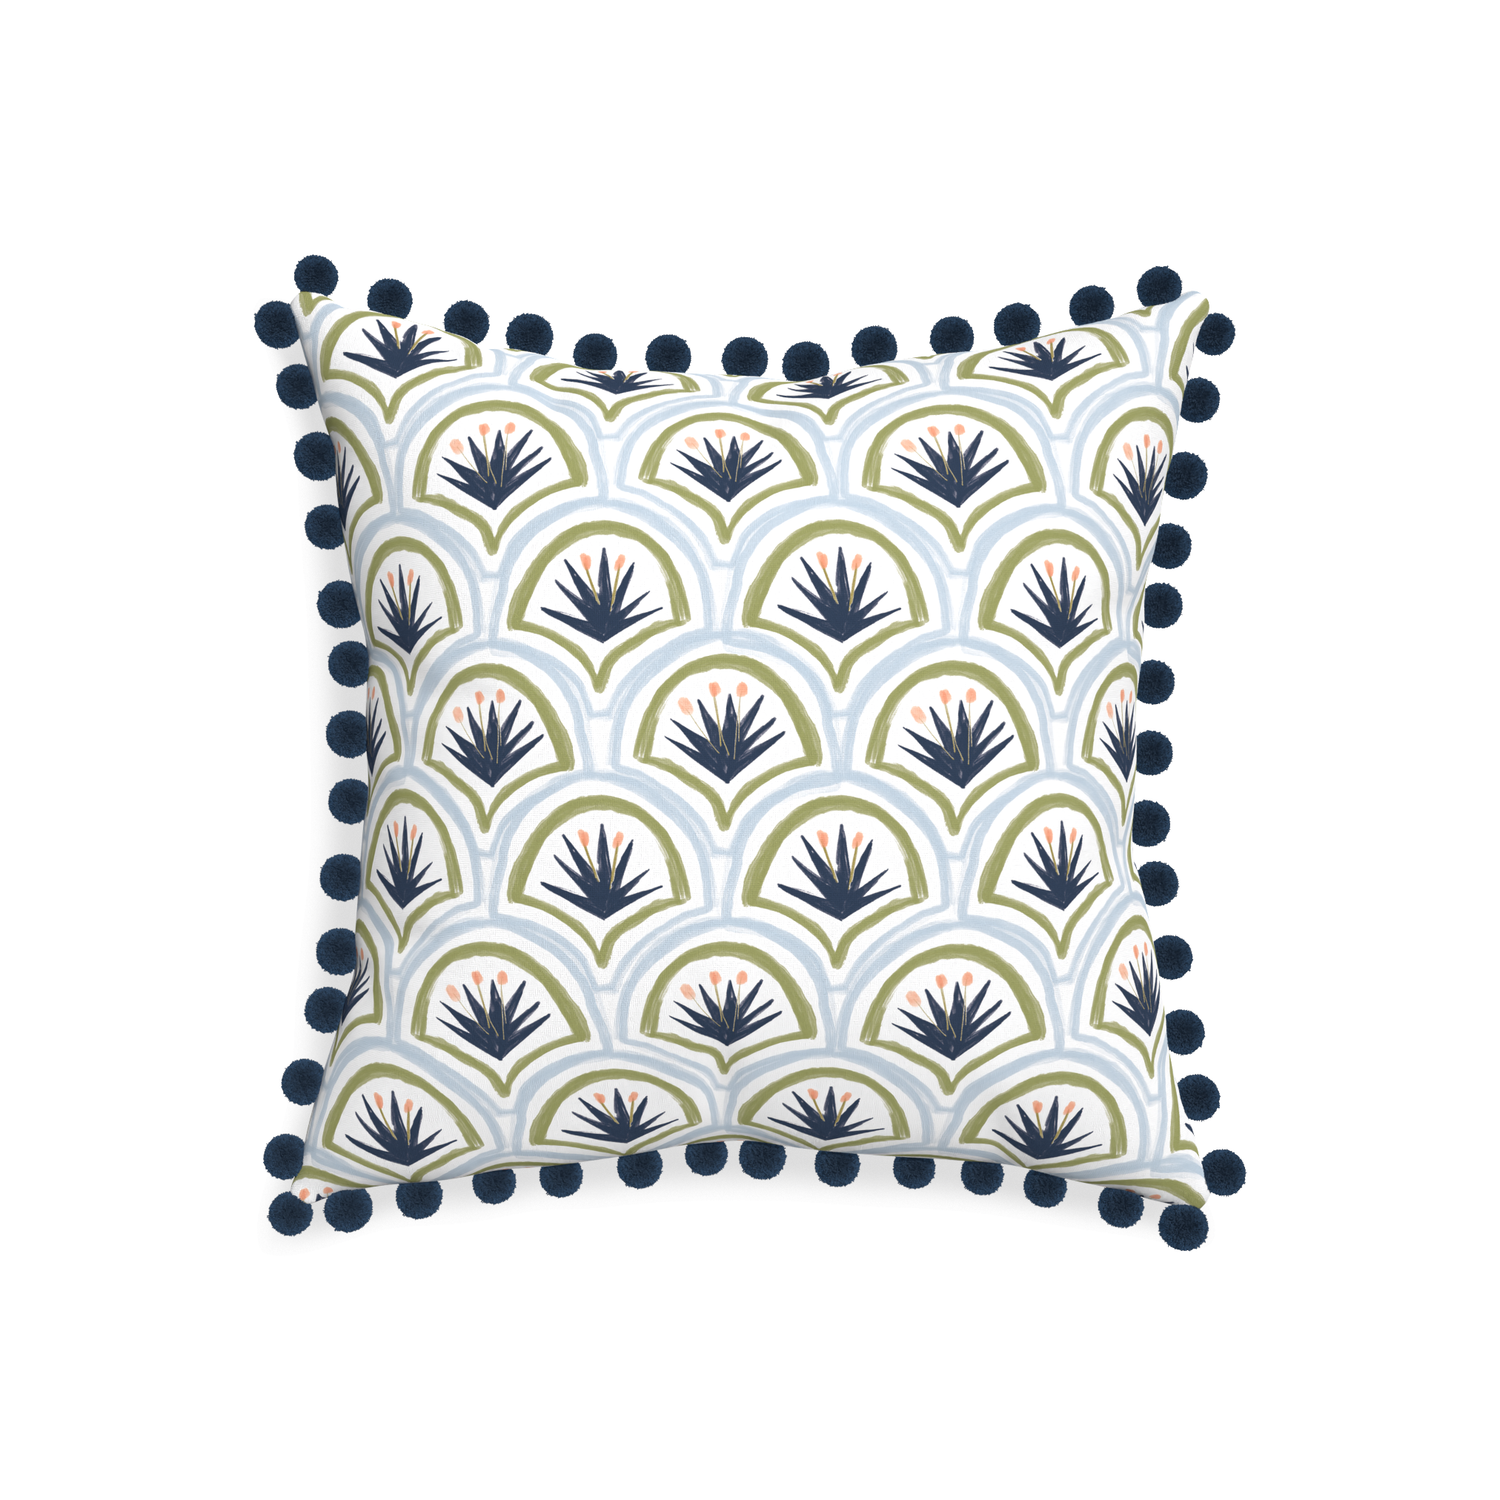 20-square thatcher midnight custom art deco palm patternpillow with c on white background